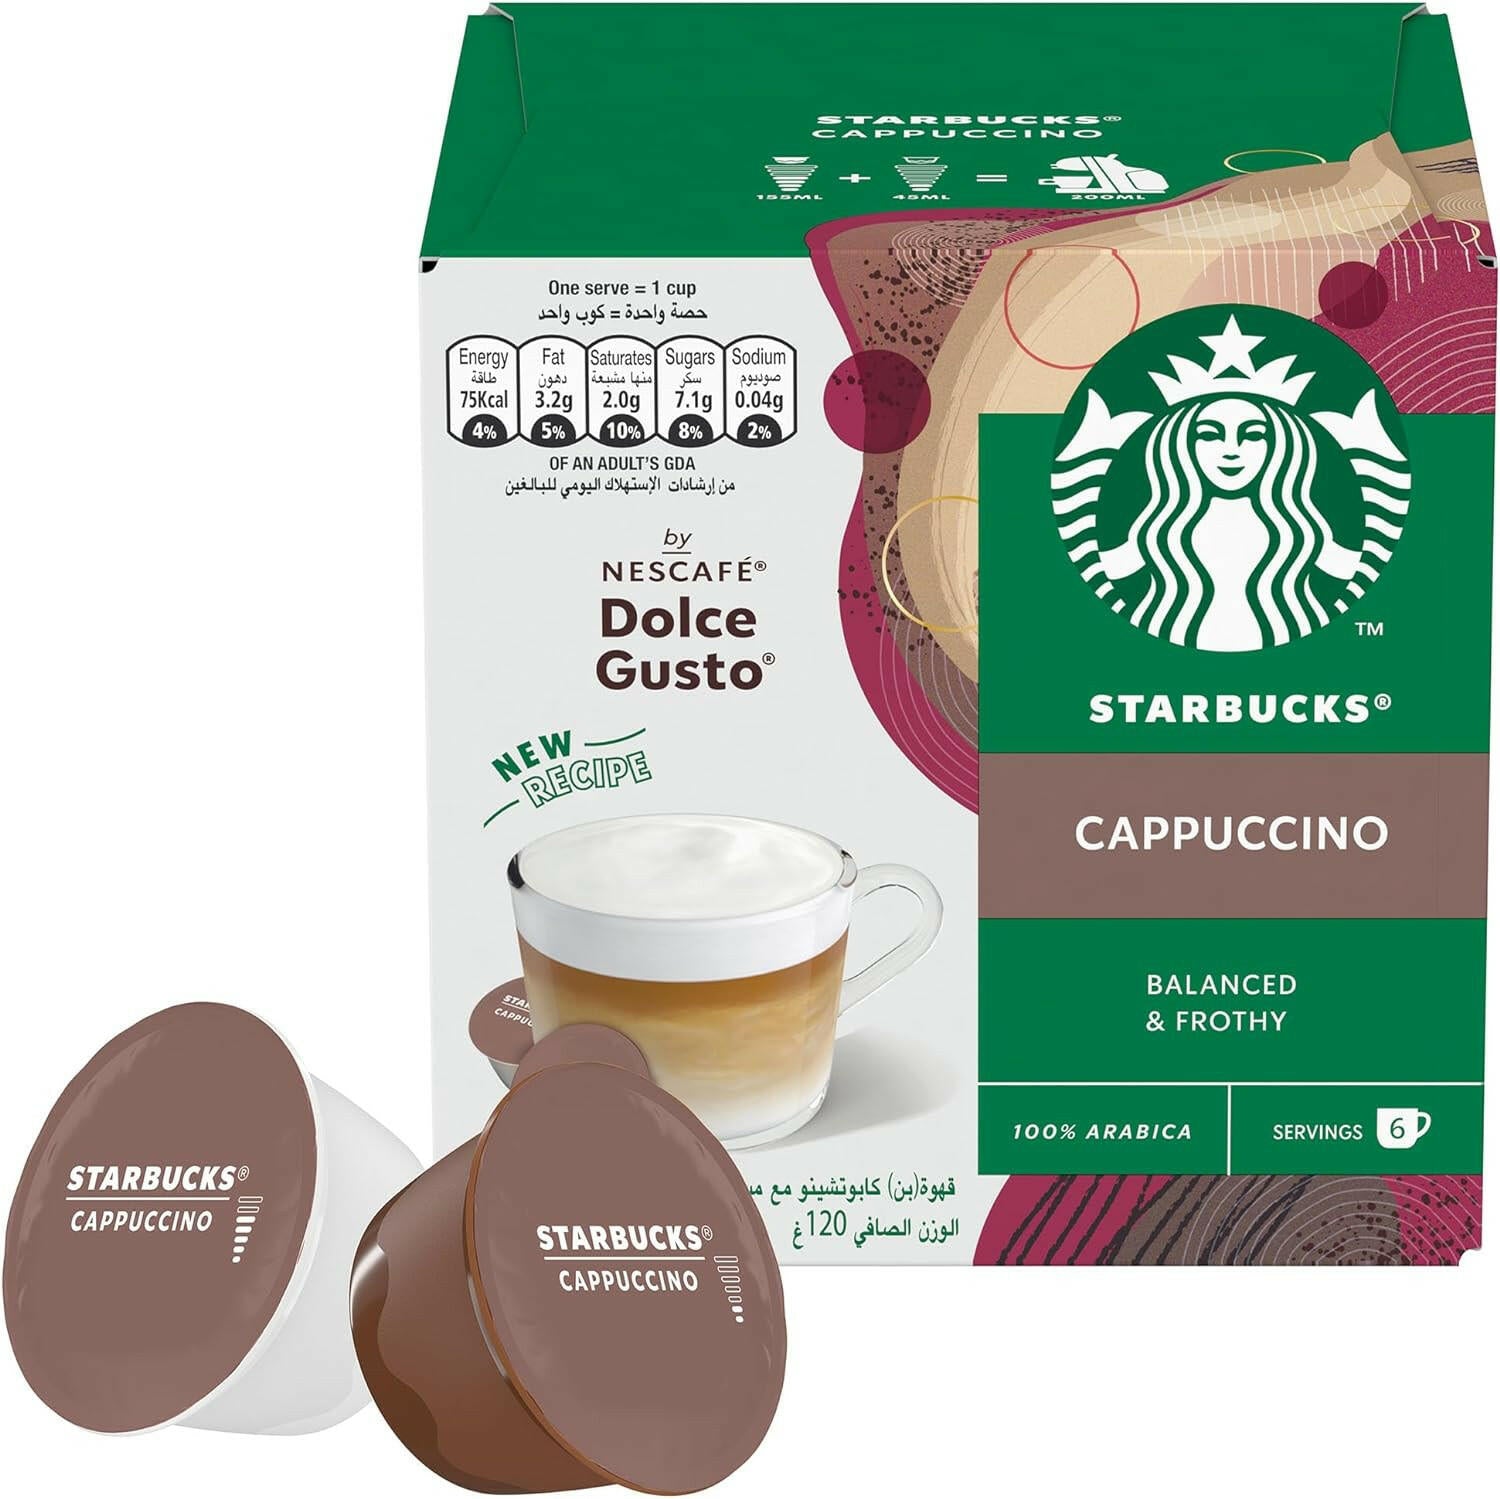 Starbucks Cappuccino by Nescafe Dolce Gusto Coffee Pods 12pcs